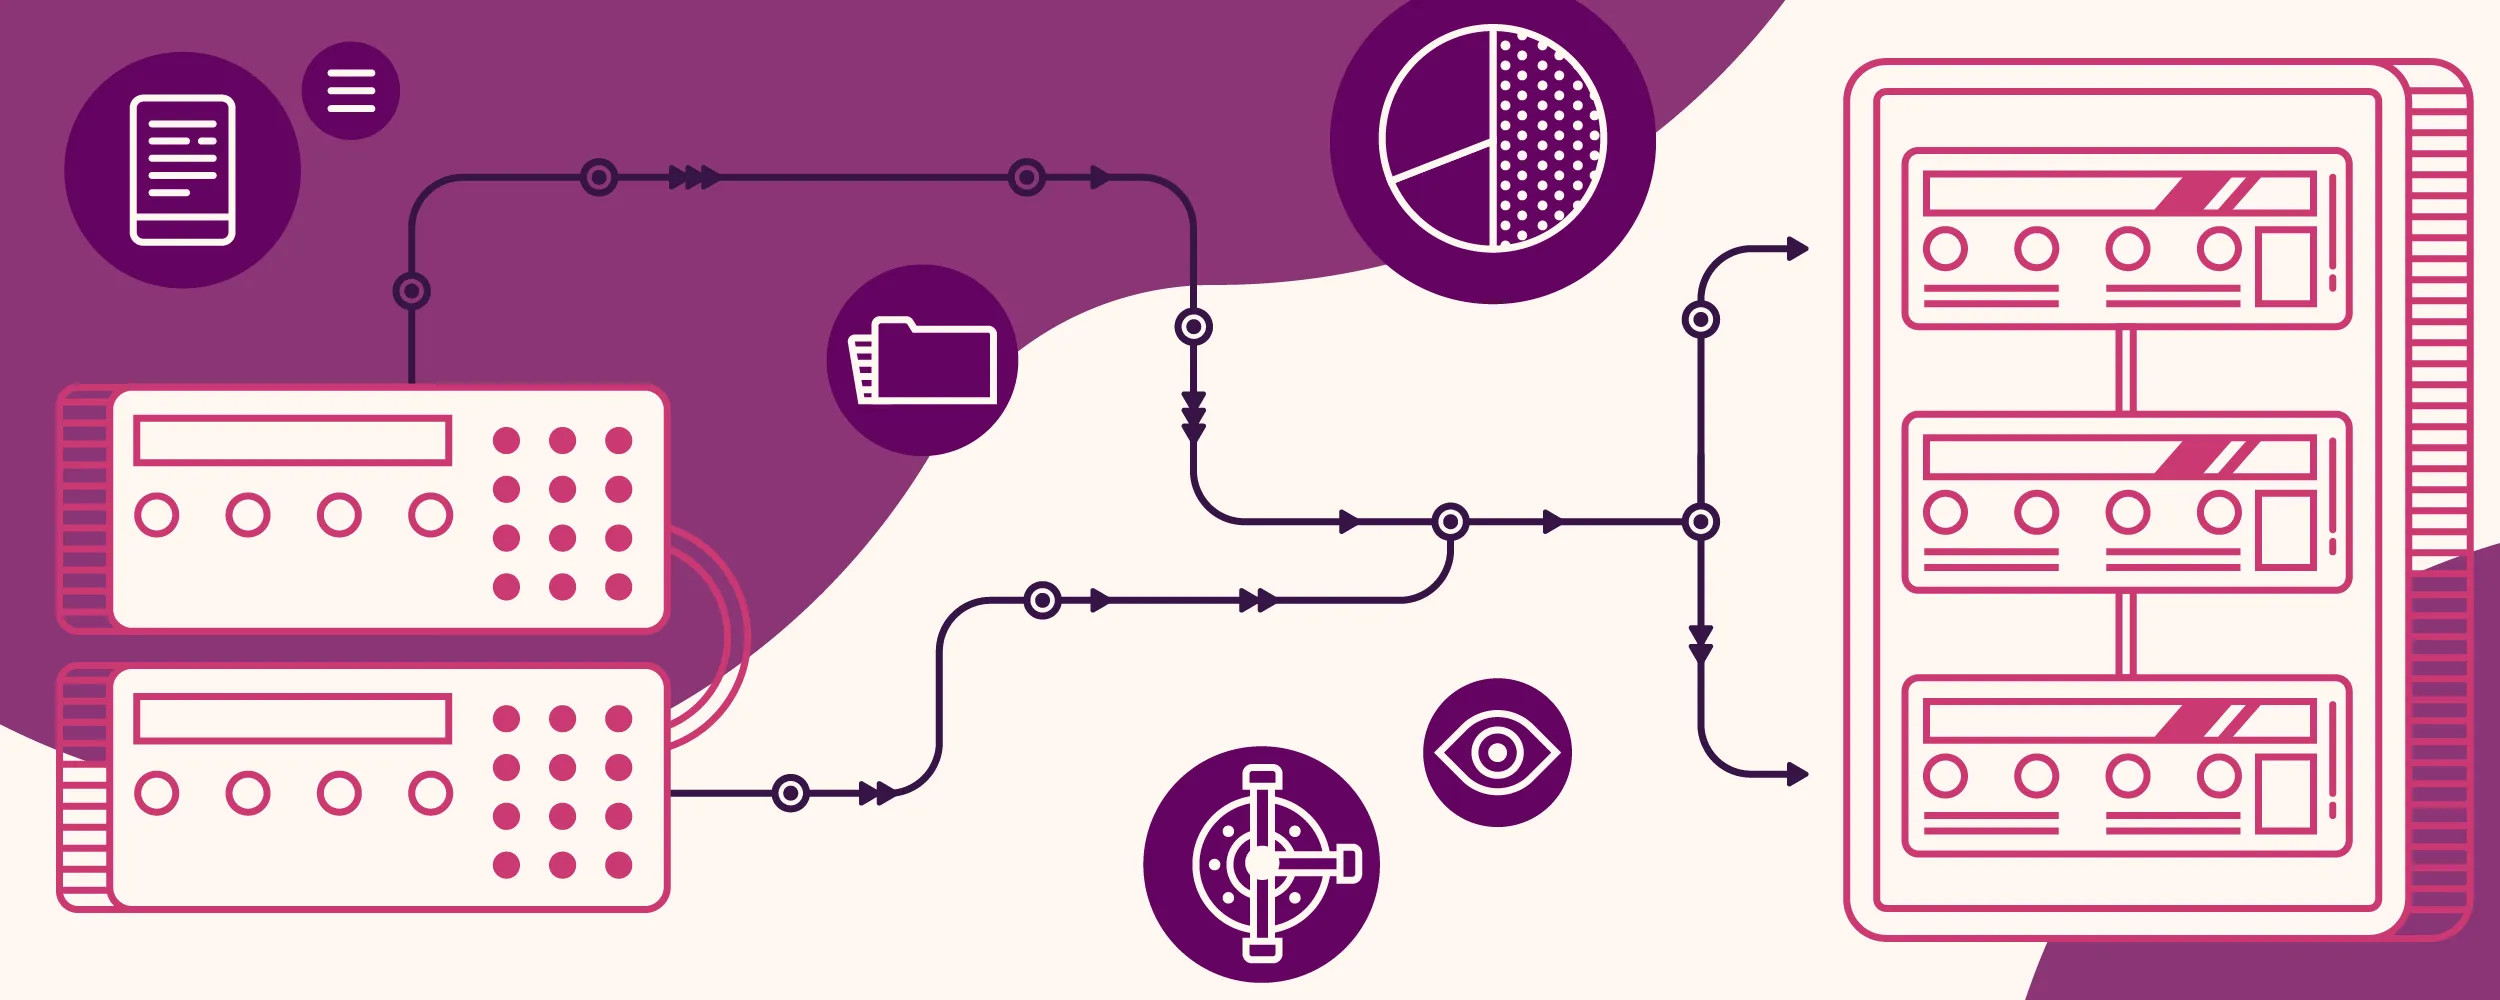 Illustration: On a purple and light pink background, white icons fill dark purple circles, including a tablet next to a navigation icon, a paper file, a pie chart with three sections, an eye, and a technical gear crank. Black arrows connect via lines and dots indicating data points and stretch from two cream rectangular computer displays with pink buttons to a larger cream mainframe with pink buttons and displays - individual elements come together to visualize Ally's approach to complex data migration.